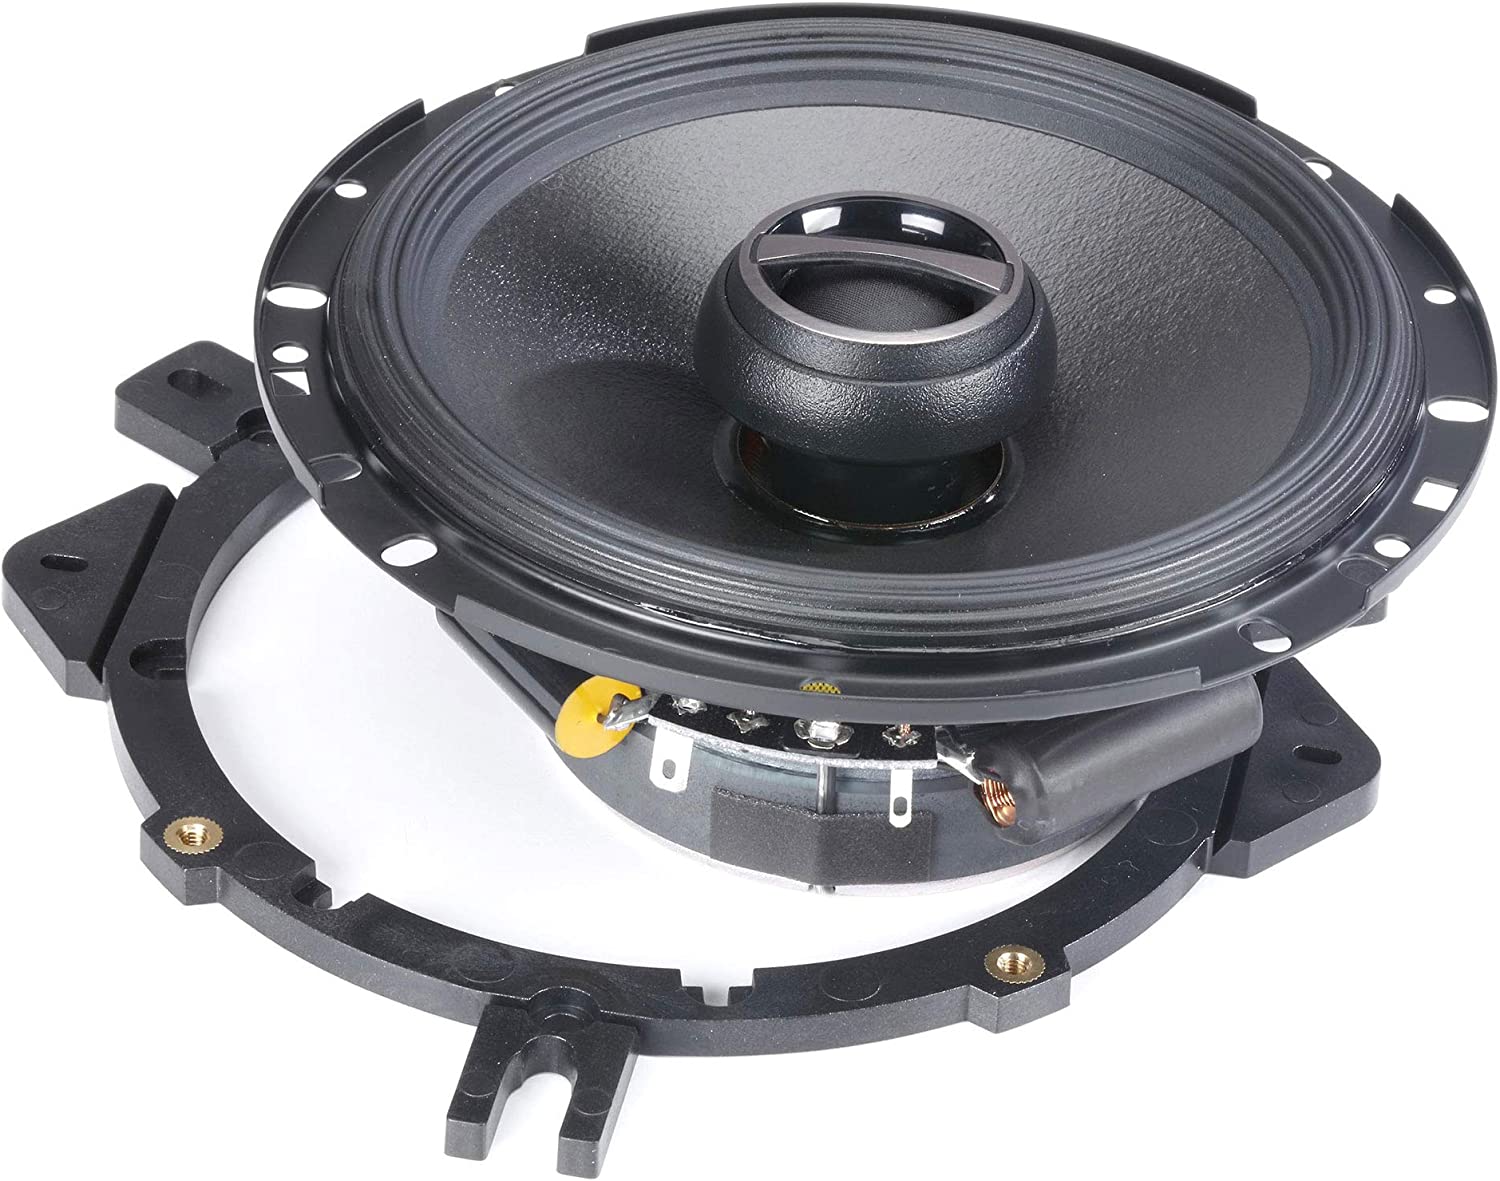 2 Pair Alpine S-S65 480W Max (160W RMS) 6.5" Type S Series 2-Way Coaxial Car Speakers